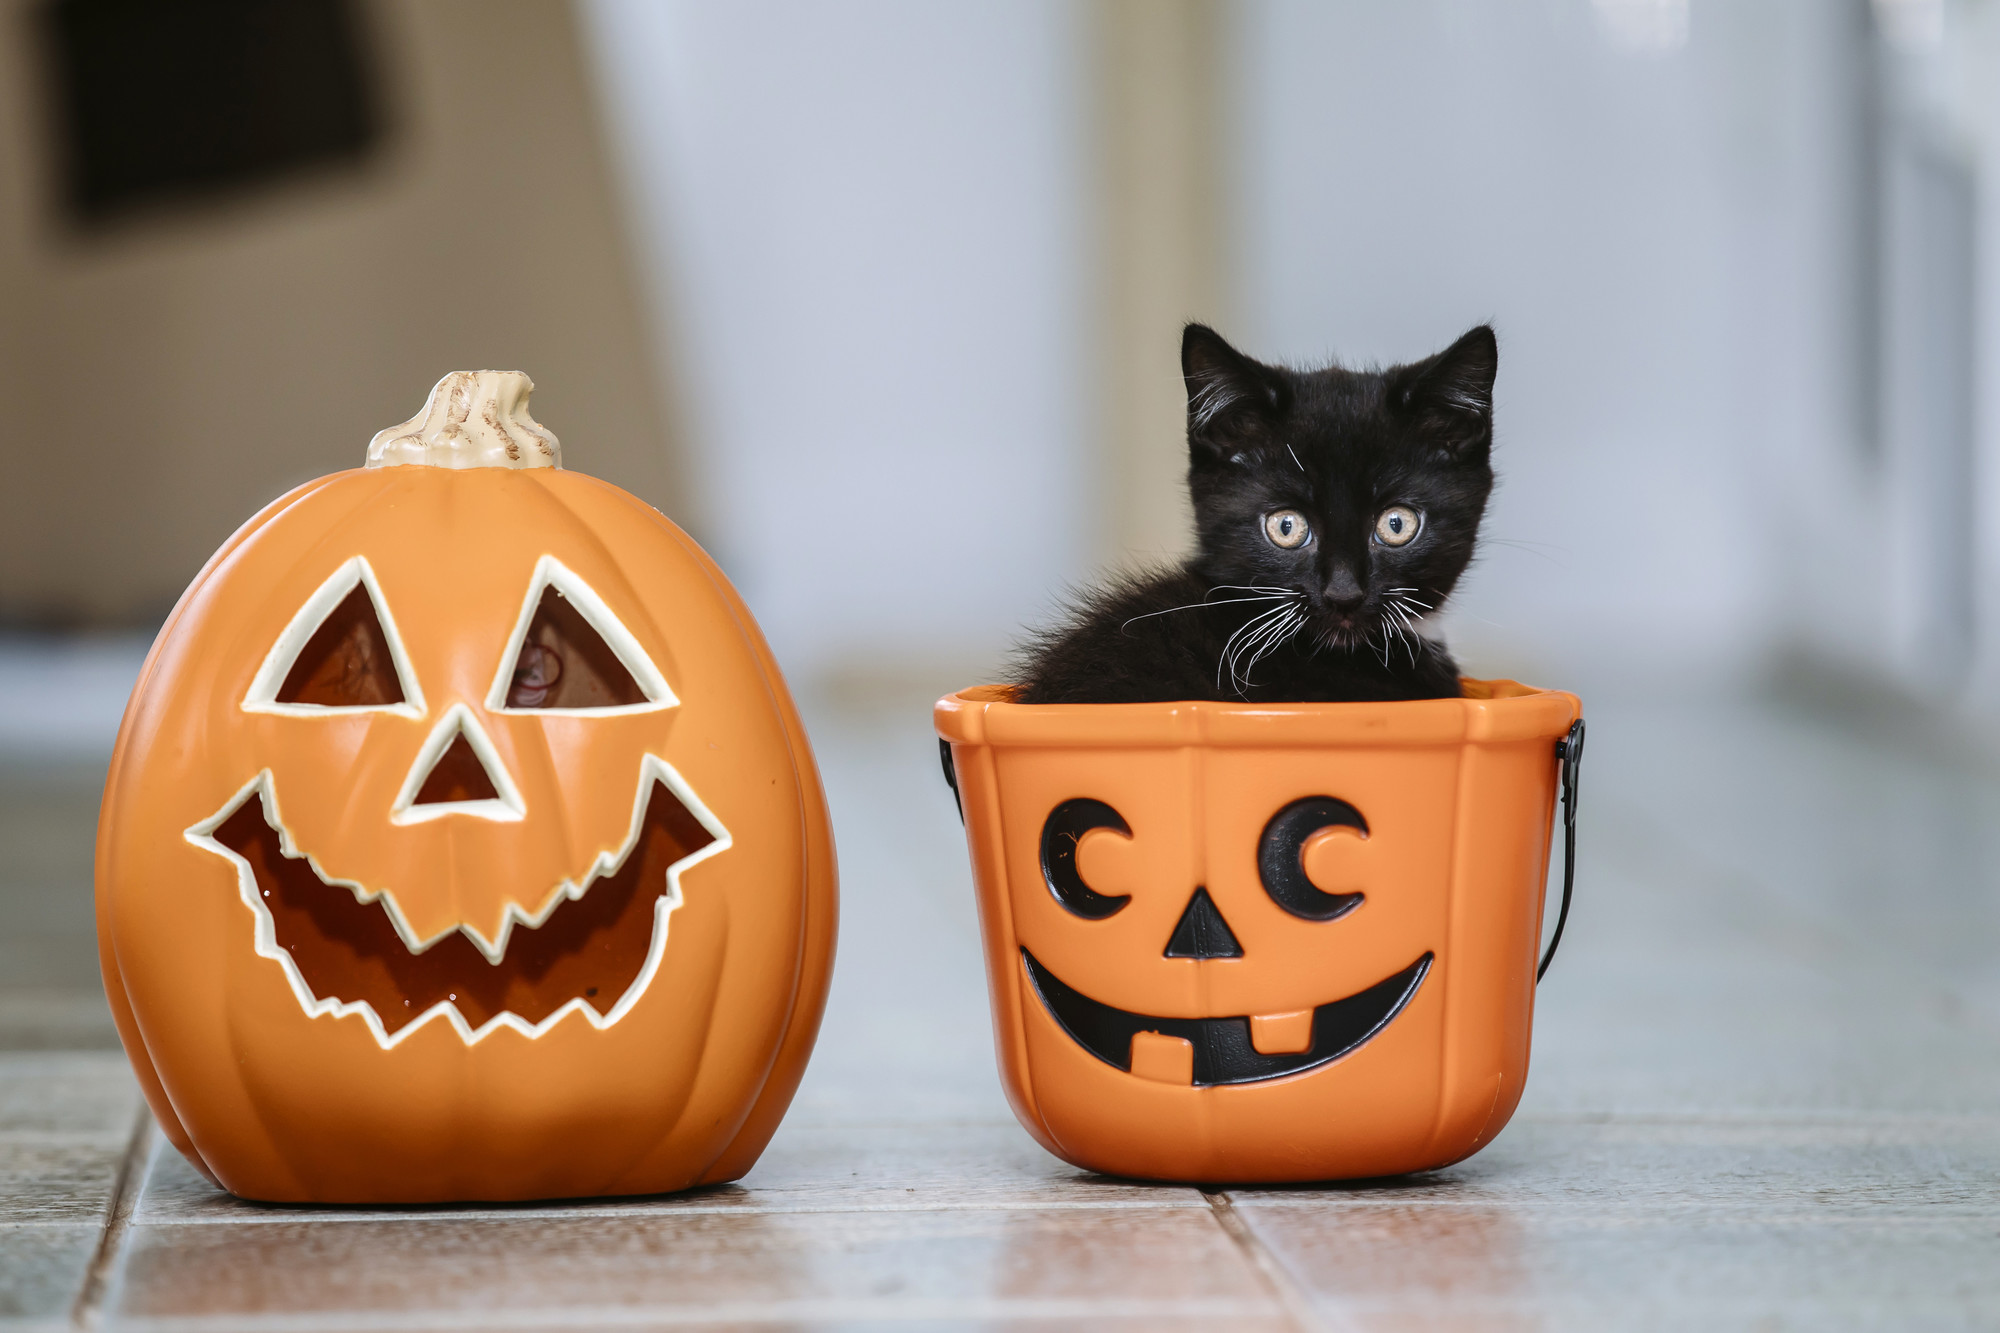 a tiny black kitten sitting in a pumpkin themed trick-or-treat bucket, next to a fake carved pumpkin